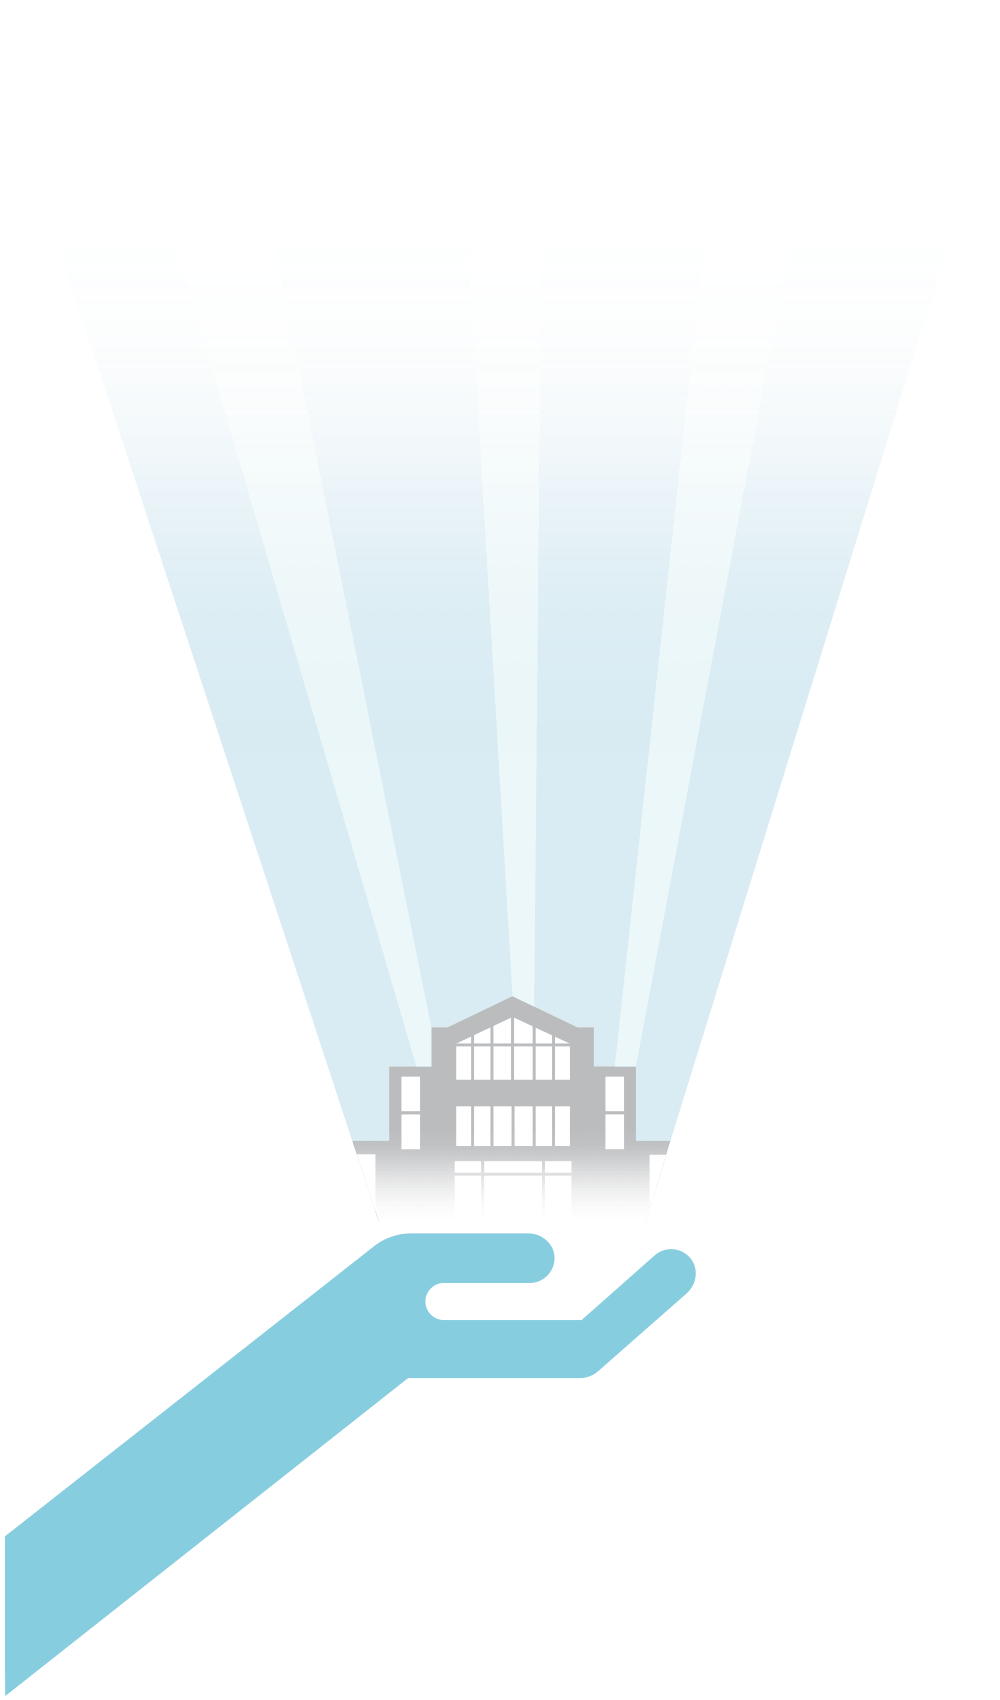 Illustration of a hand holding up a building of Mount Royal University. A glowing light is behind both images.